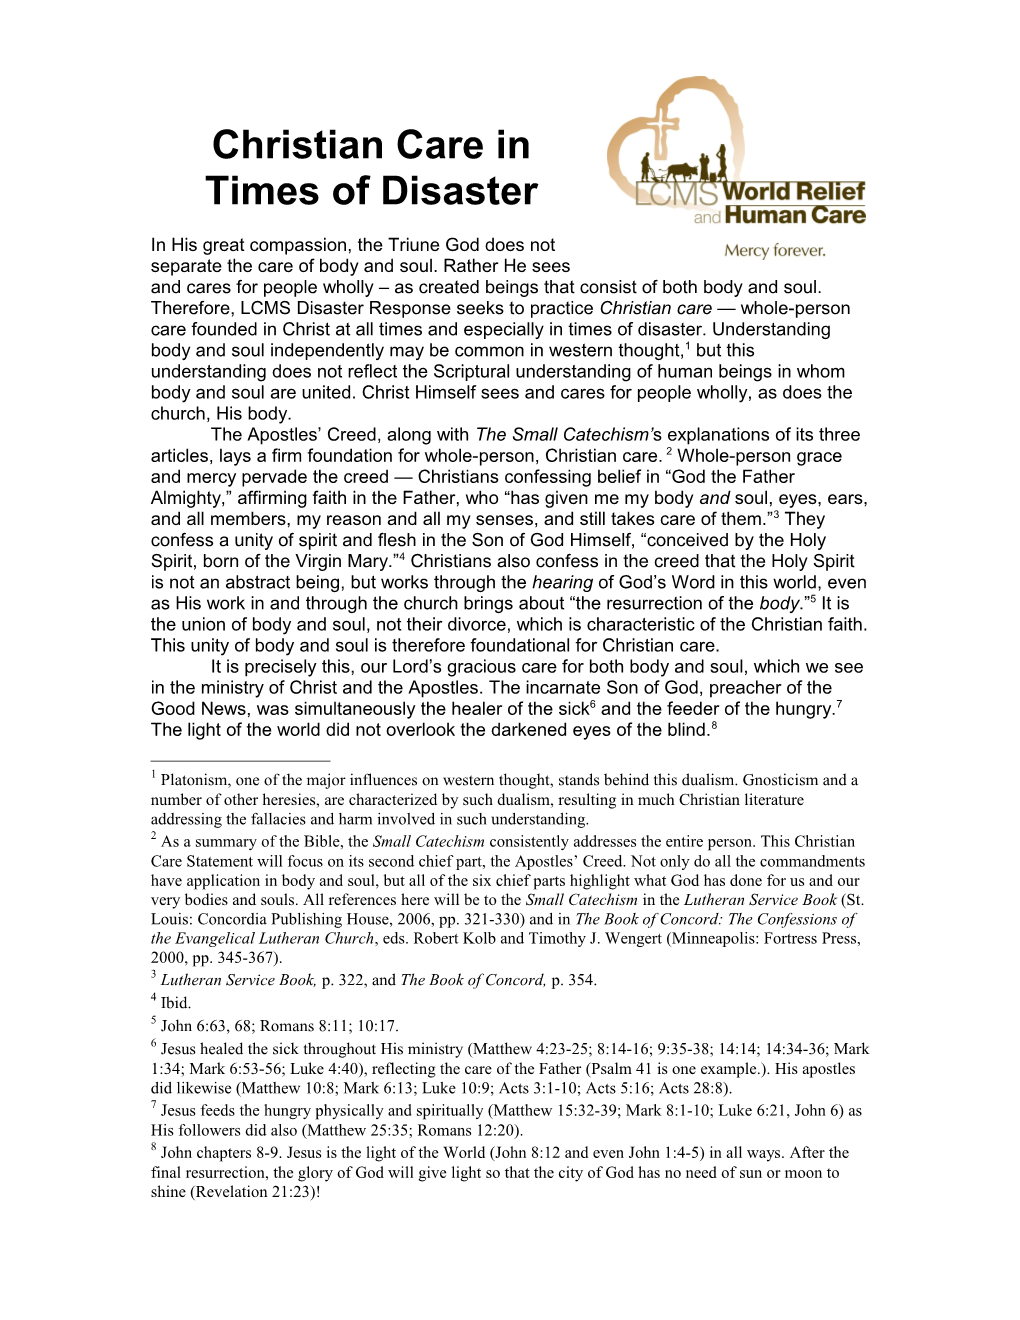 Christian Care in Times of Disaster